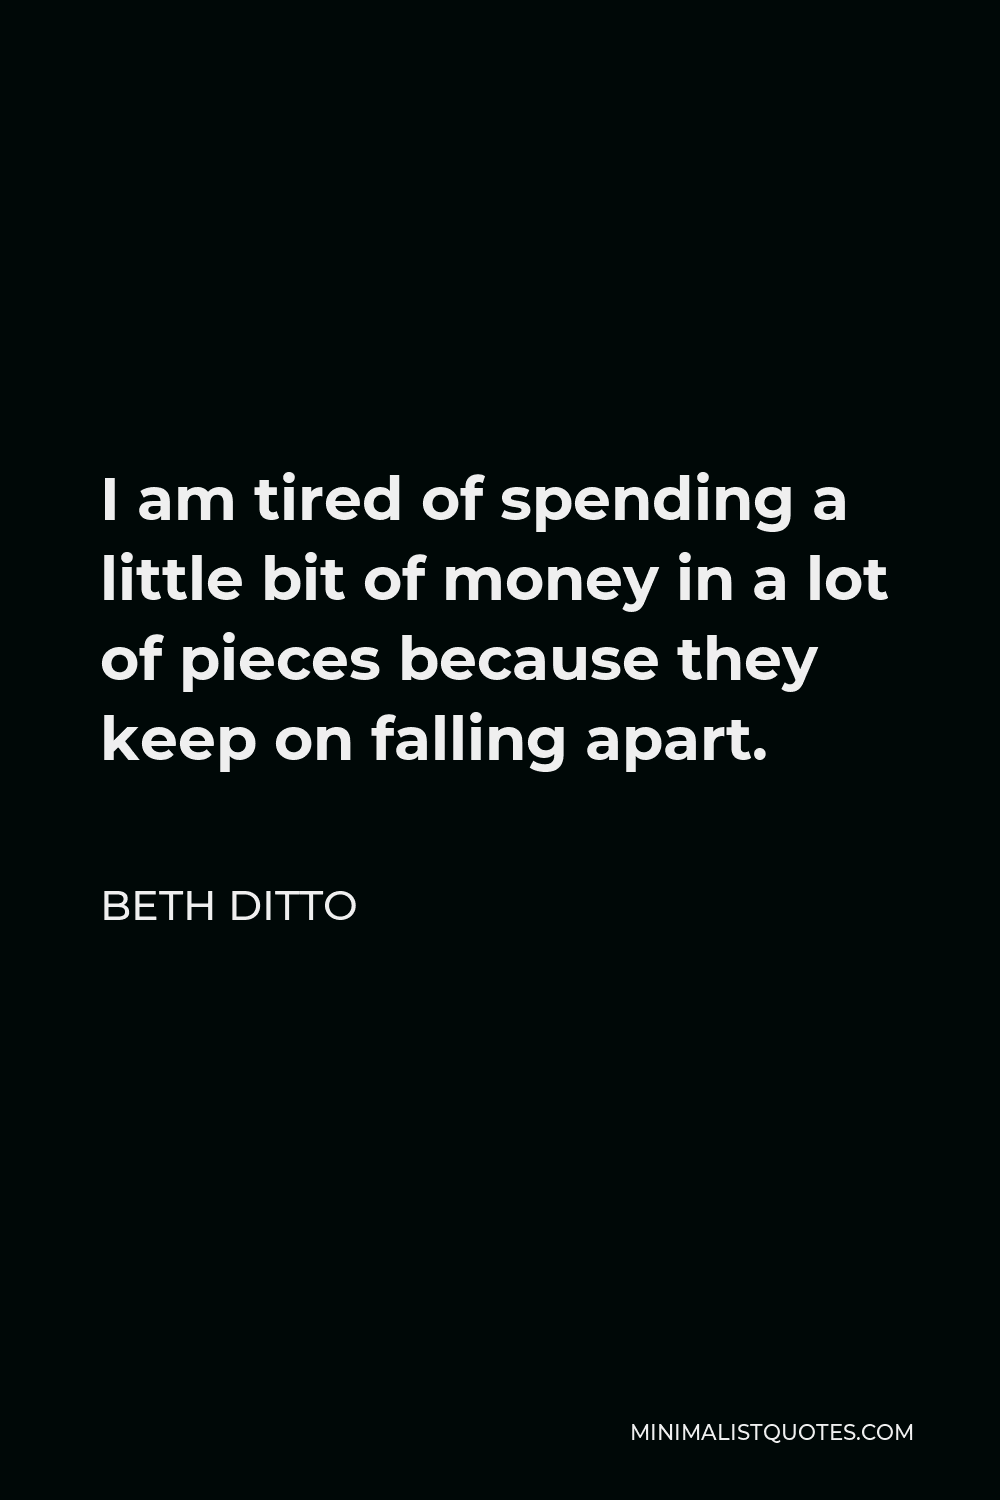 Beth Ditto Quote - I am tired of spending a little bit of money in a lot of pieces because they keep on falling apart.